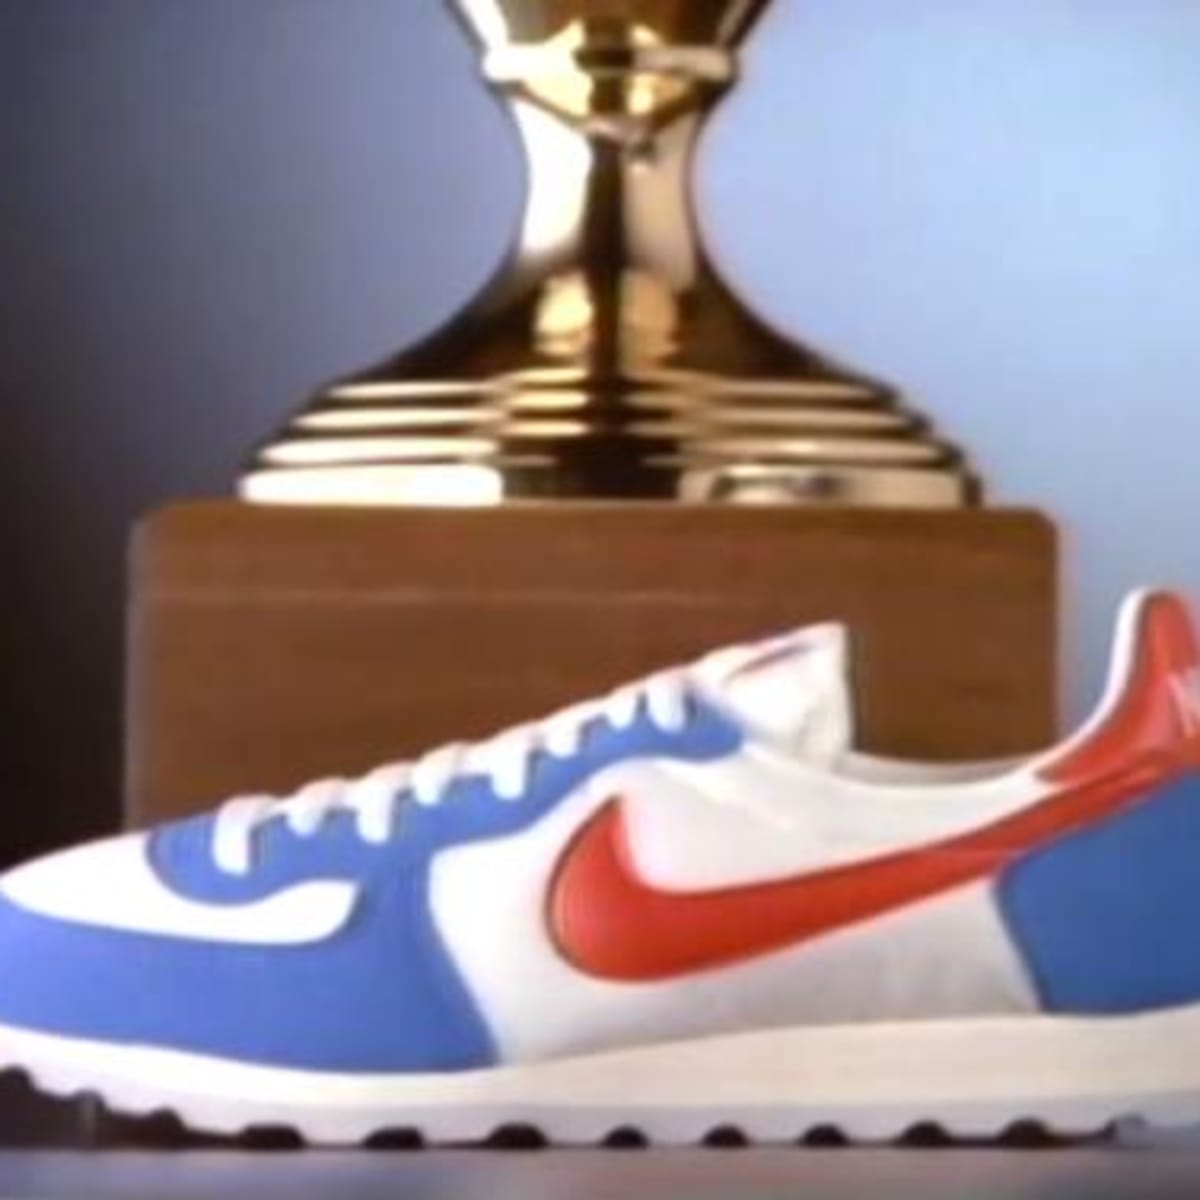 Watch Lost Nike Commercials, 30 Years Later - Illustrated